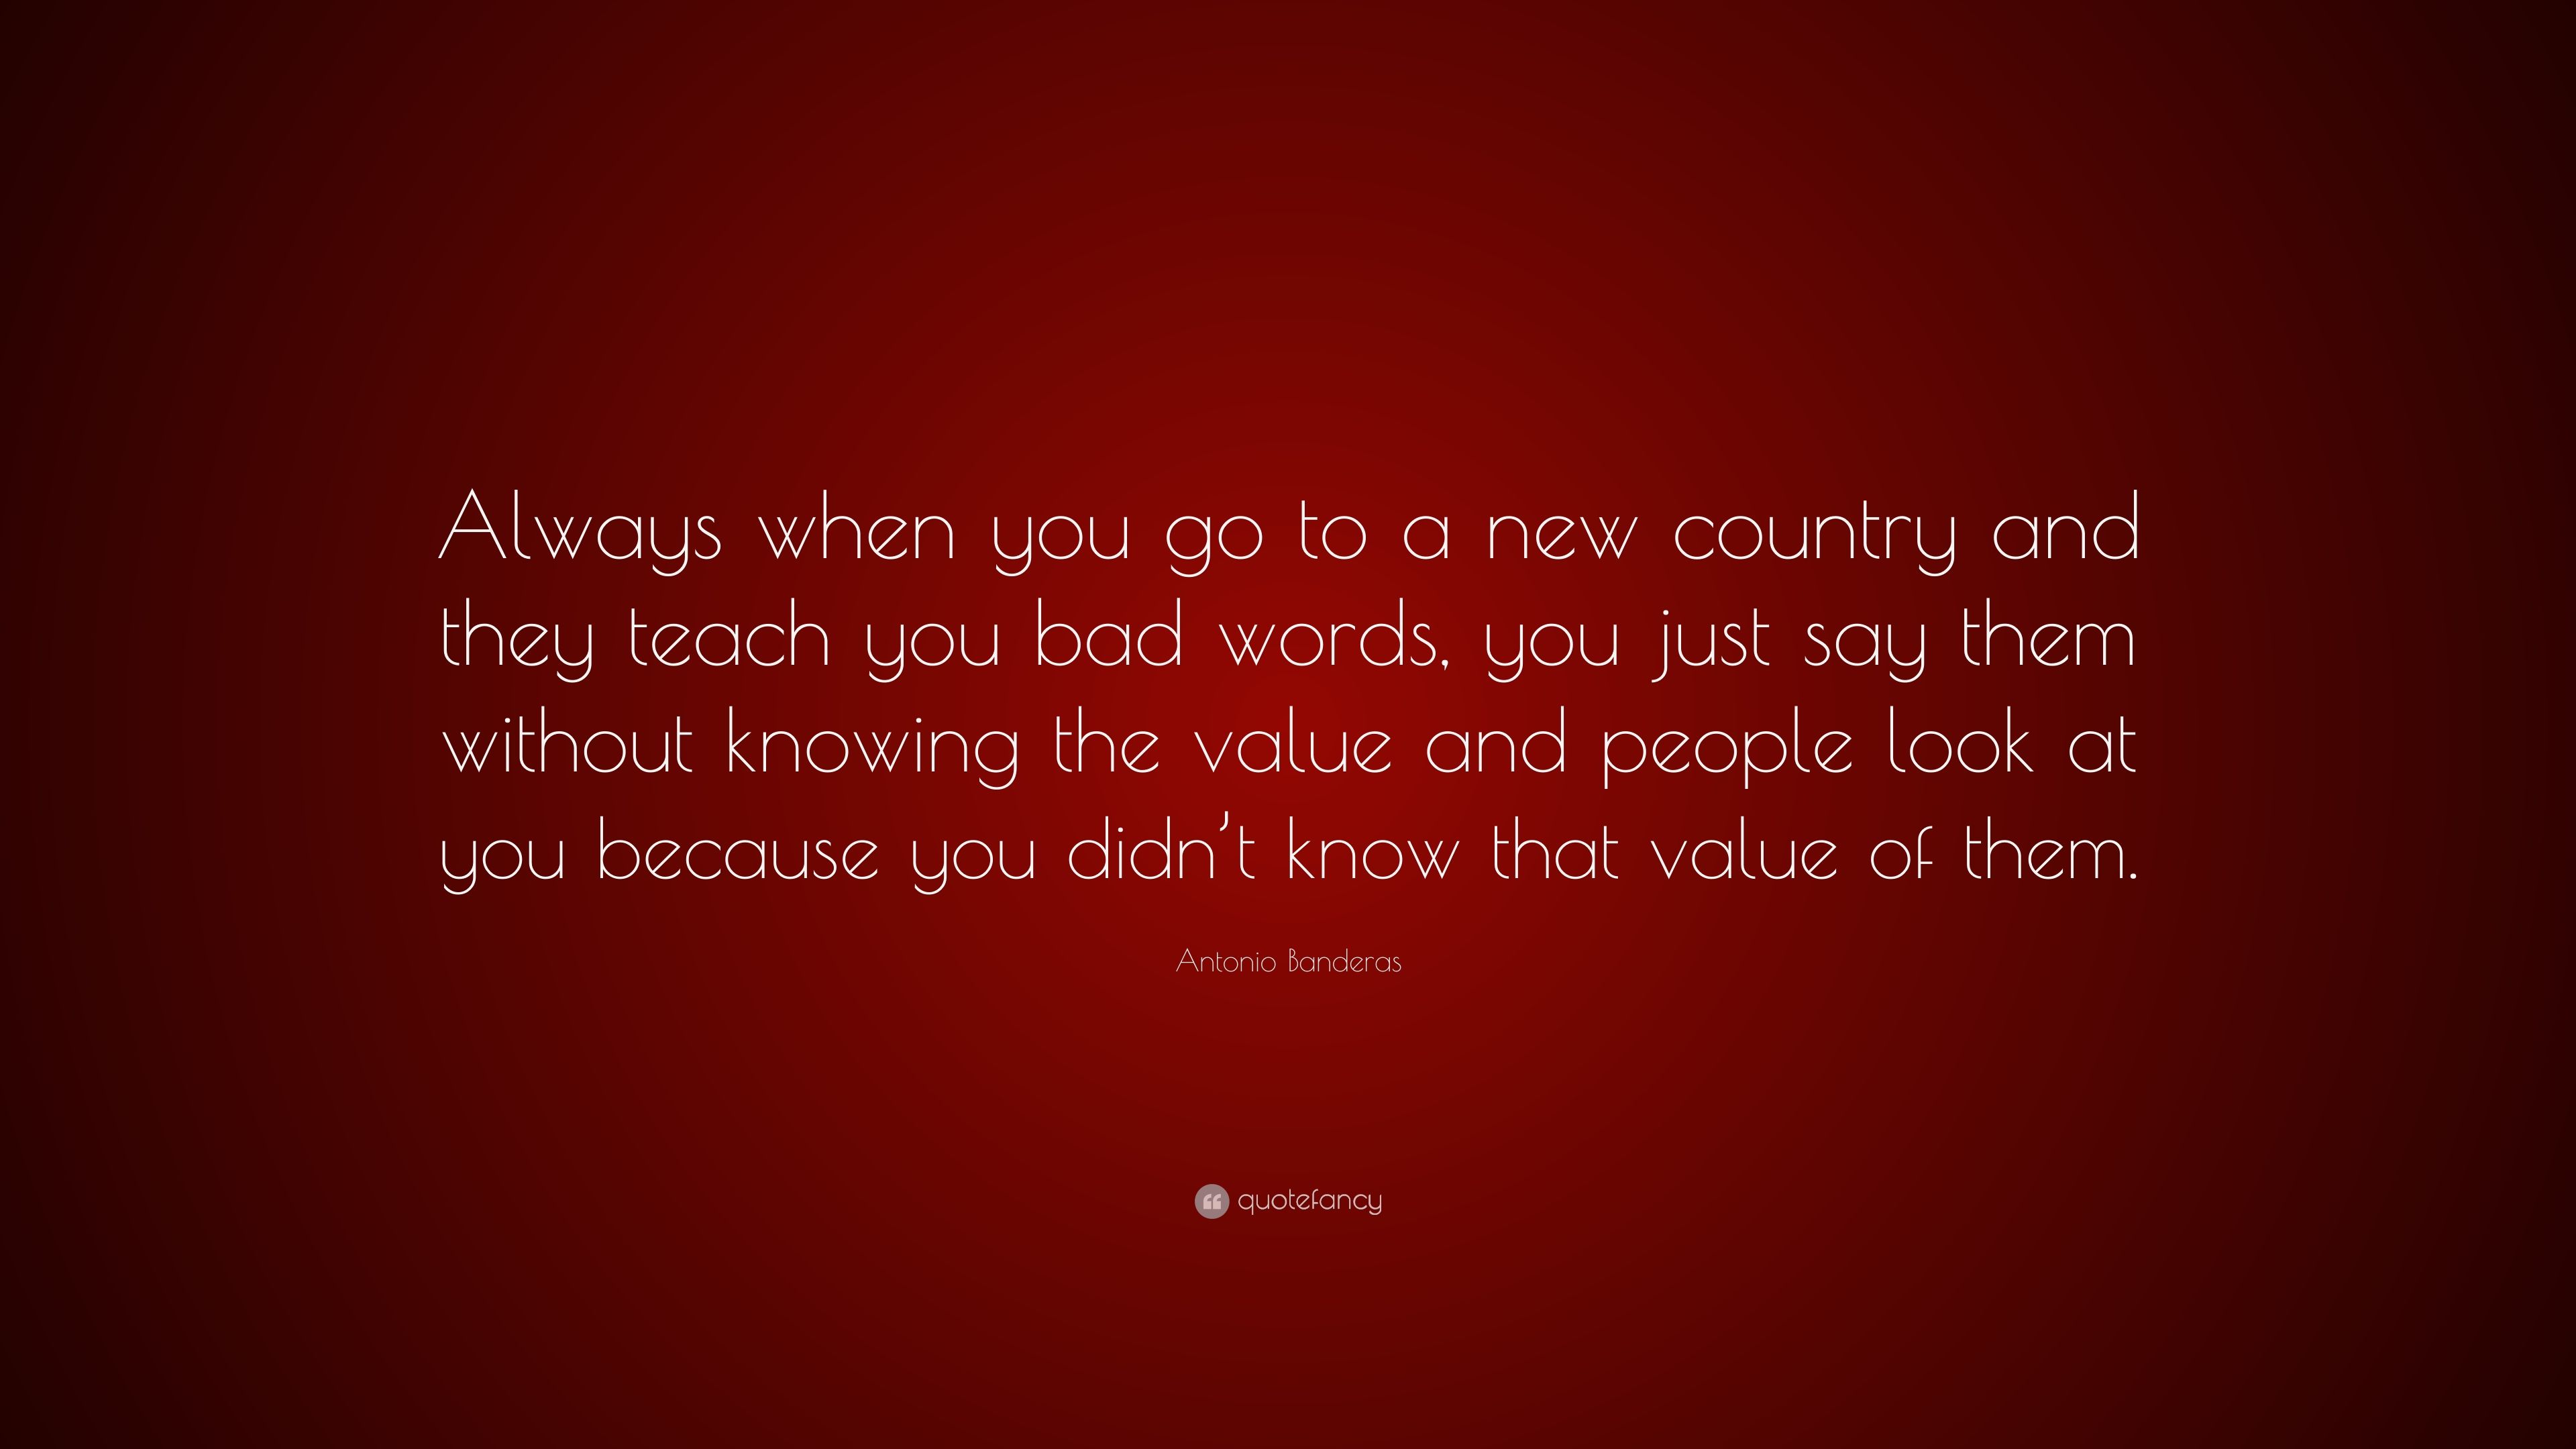 Antonio Banderas Quote: “Always when you go to a new country